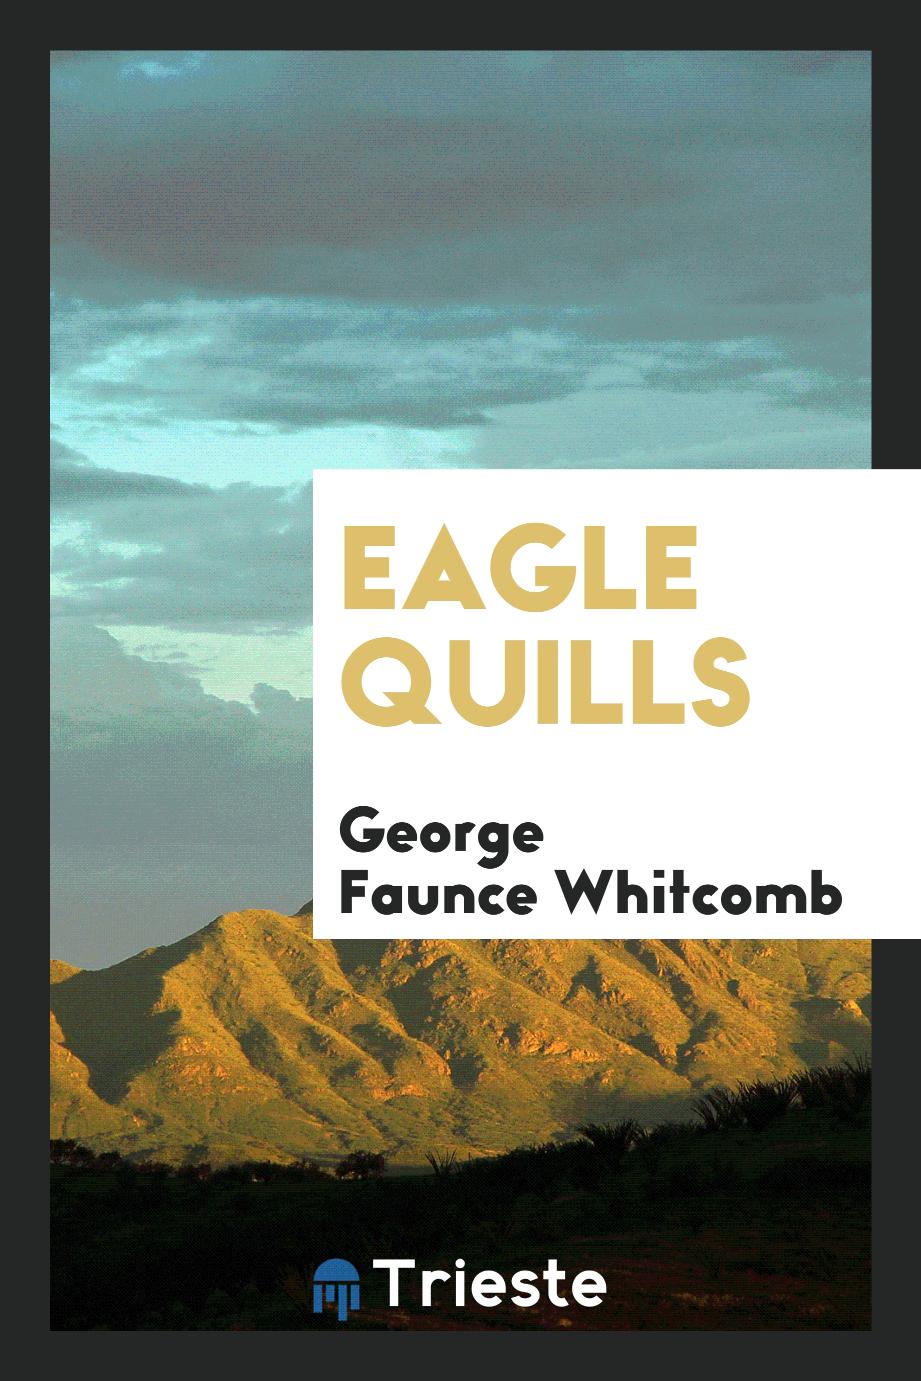 Eagle Quills